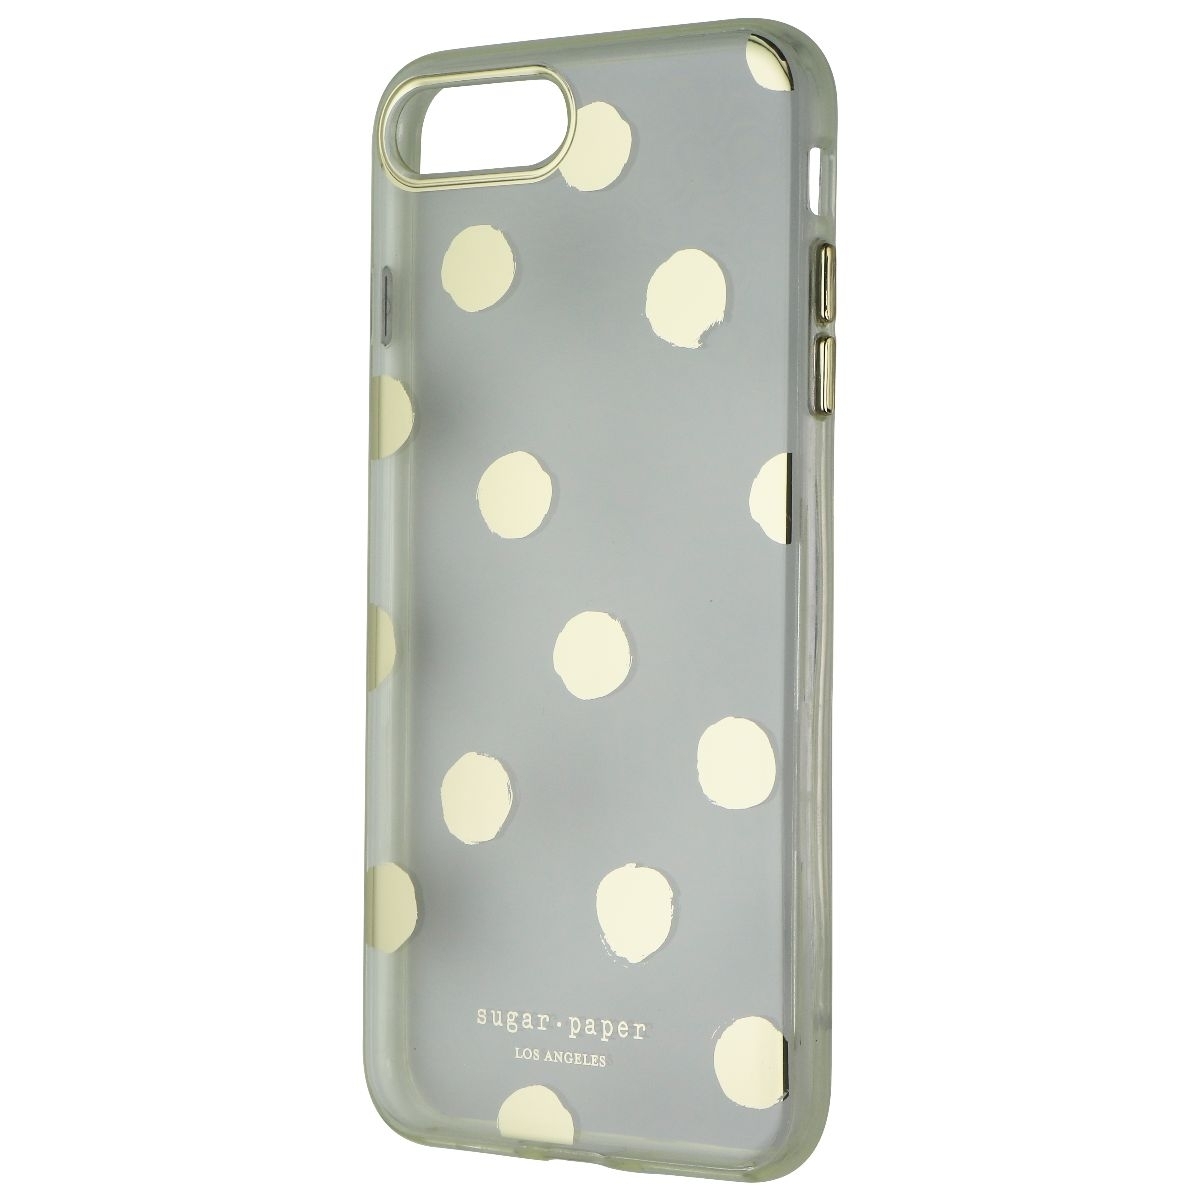 Sugar Paper Printed Case For Apple IPhone 7 Plus - Clear/Gold Dots (Refurbished)